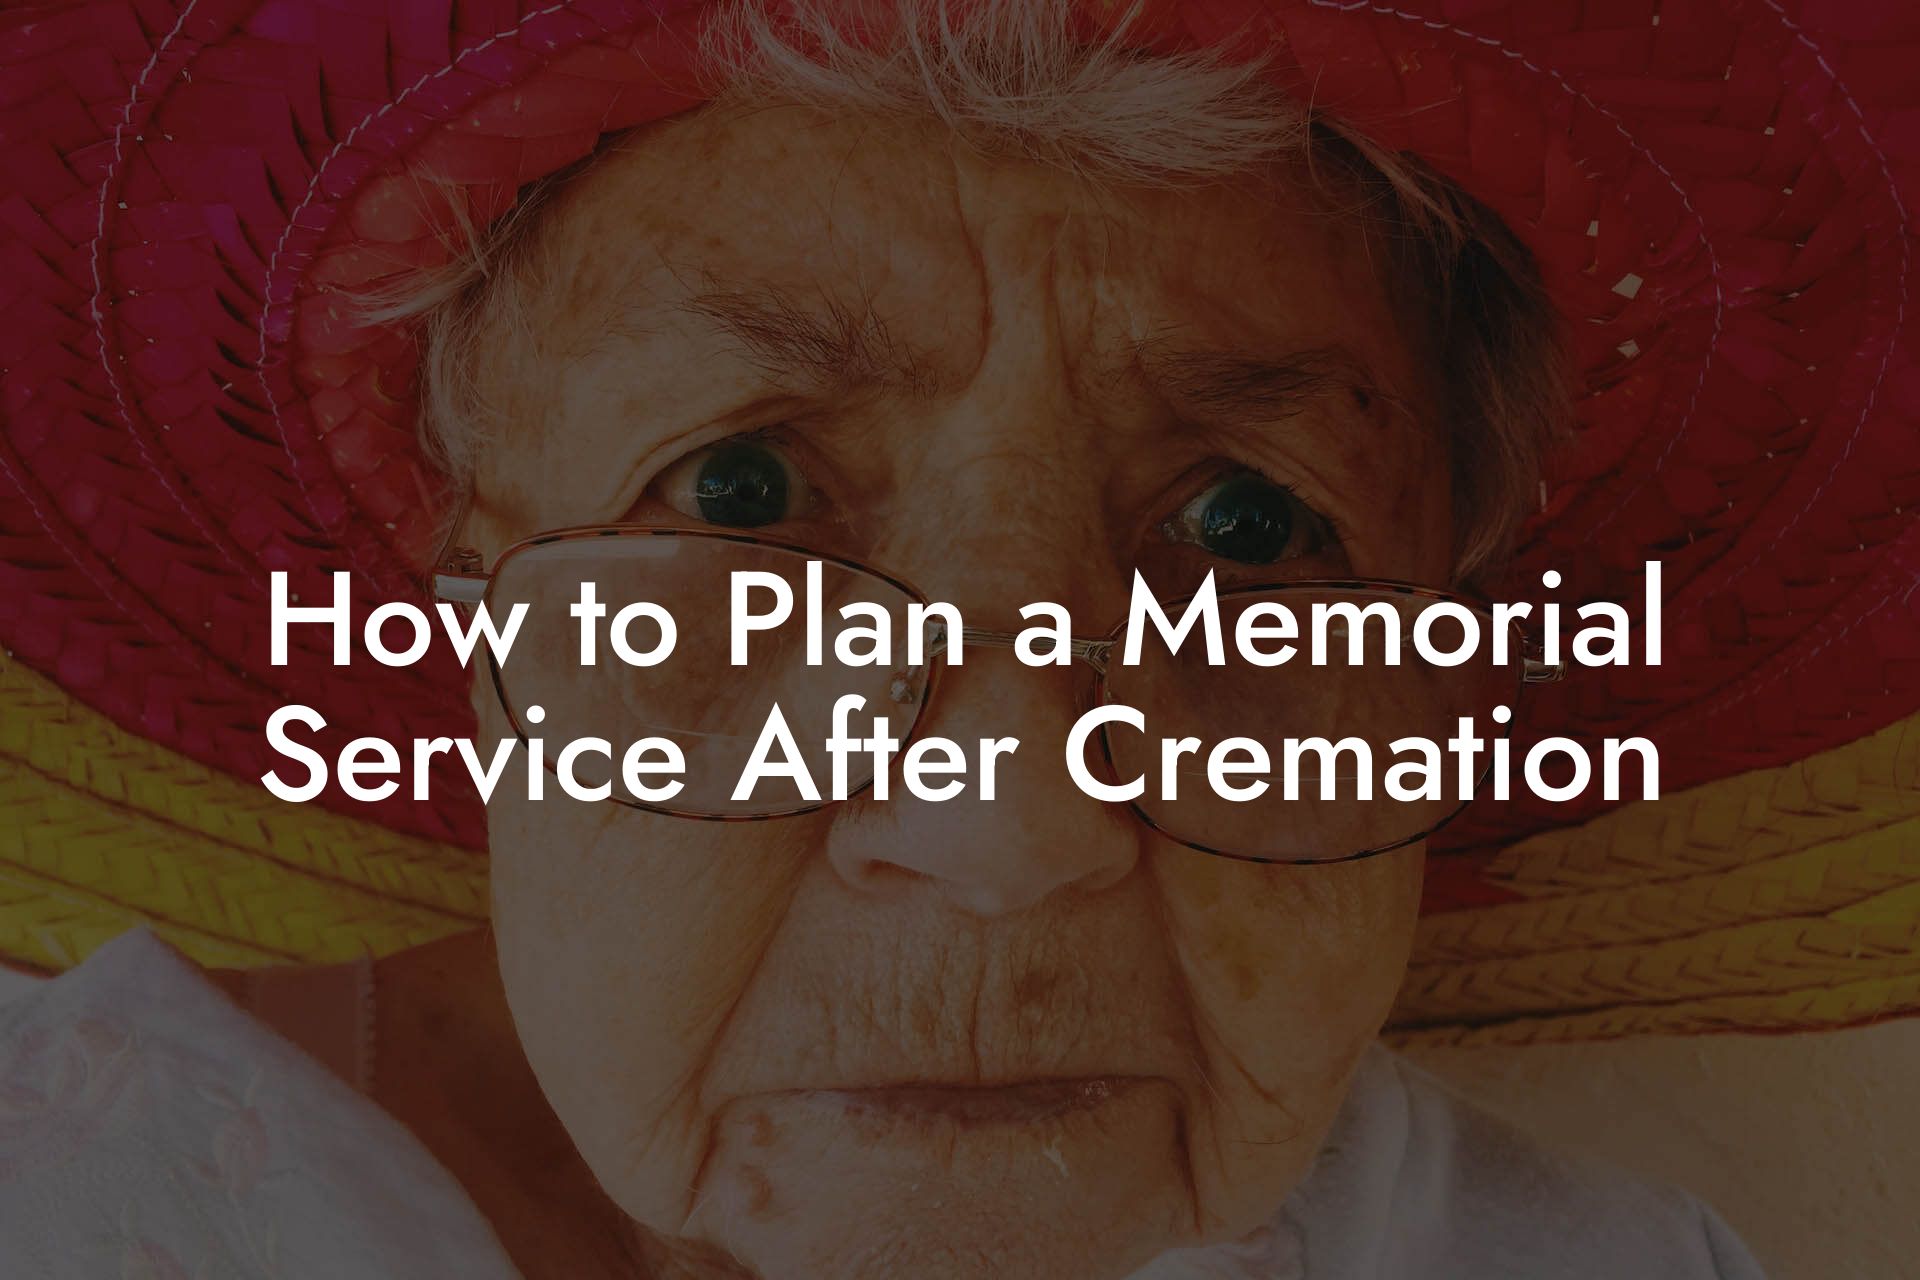 How to Plan a Memorial Service After Cremation